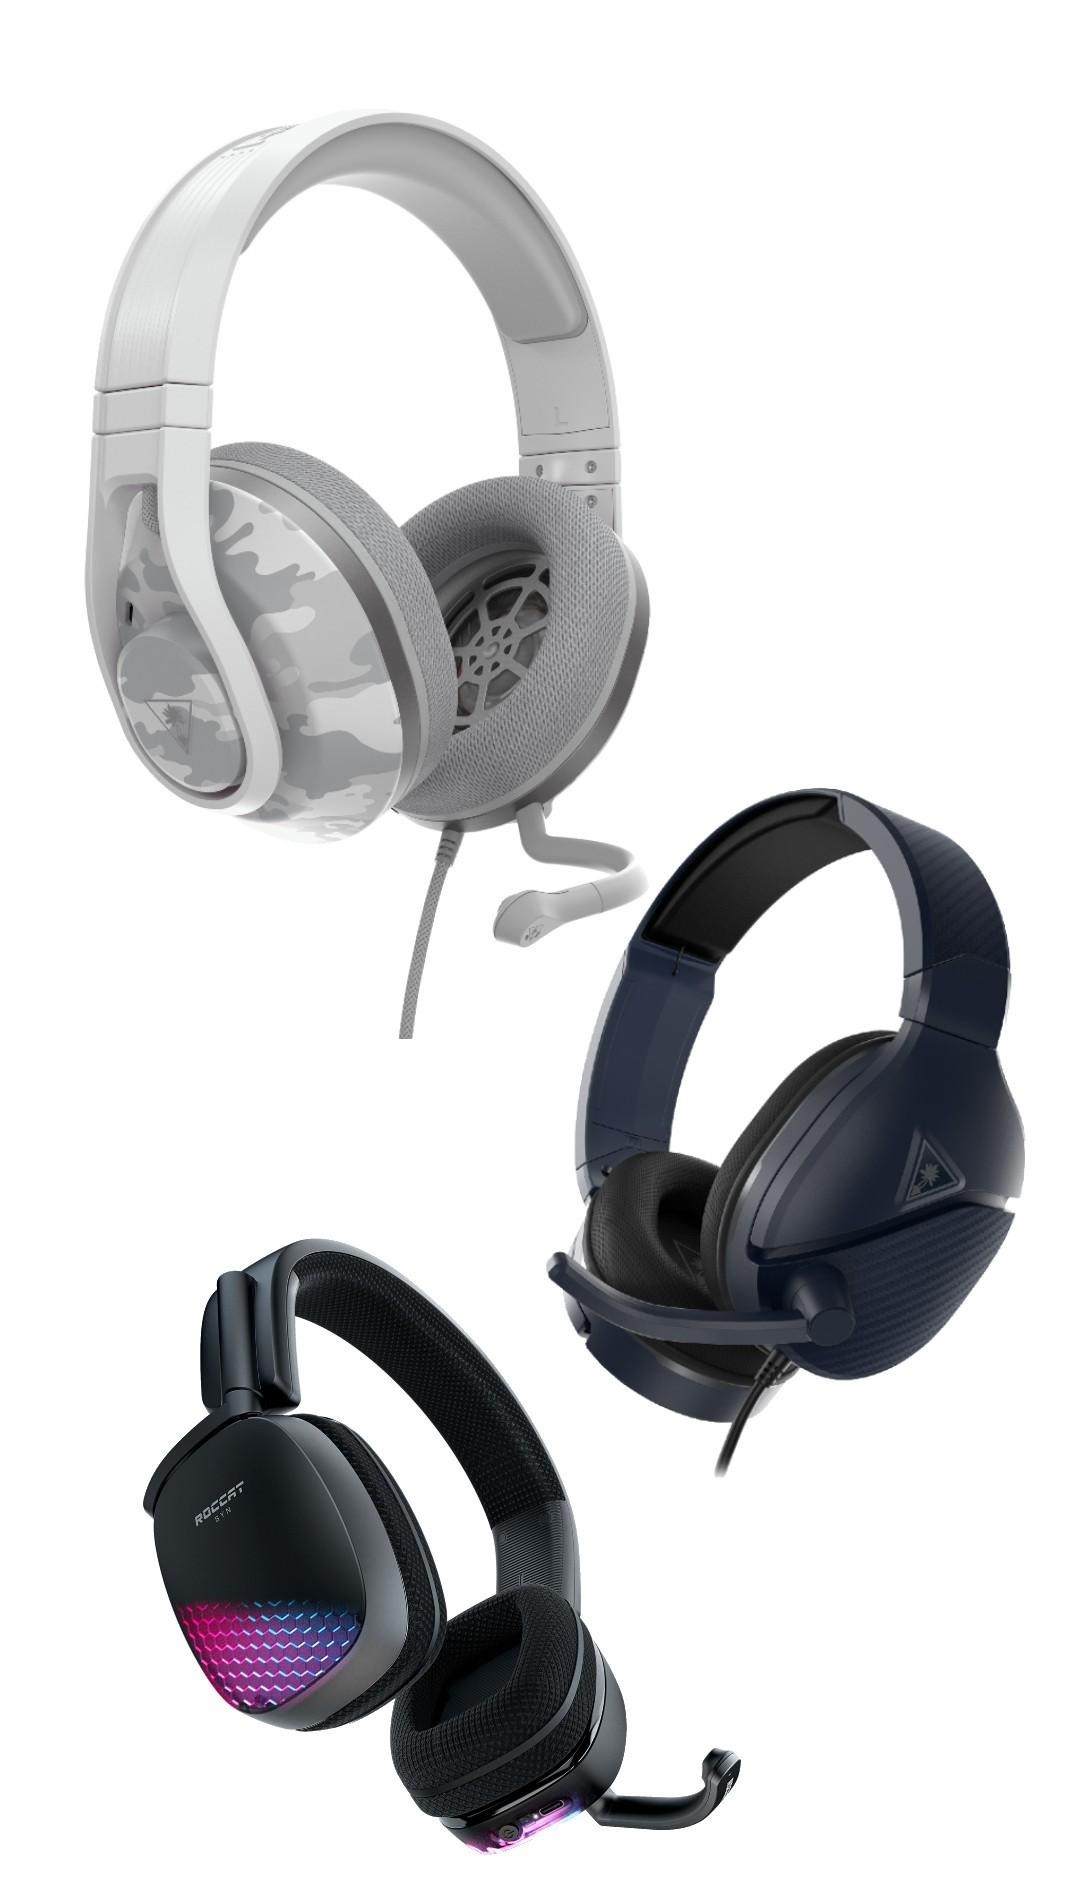 Turtle Beach, ROCCAT, and Neat Deliver High-quality, Award-winning Gaming Accessories and Microphones for the Holidays